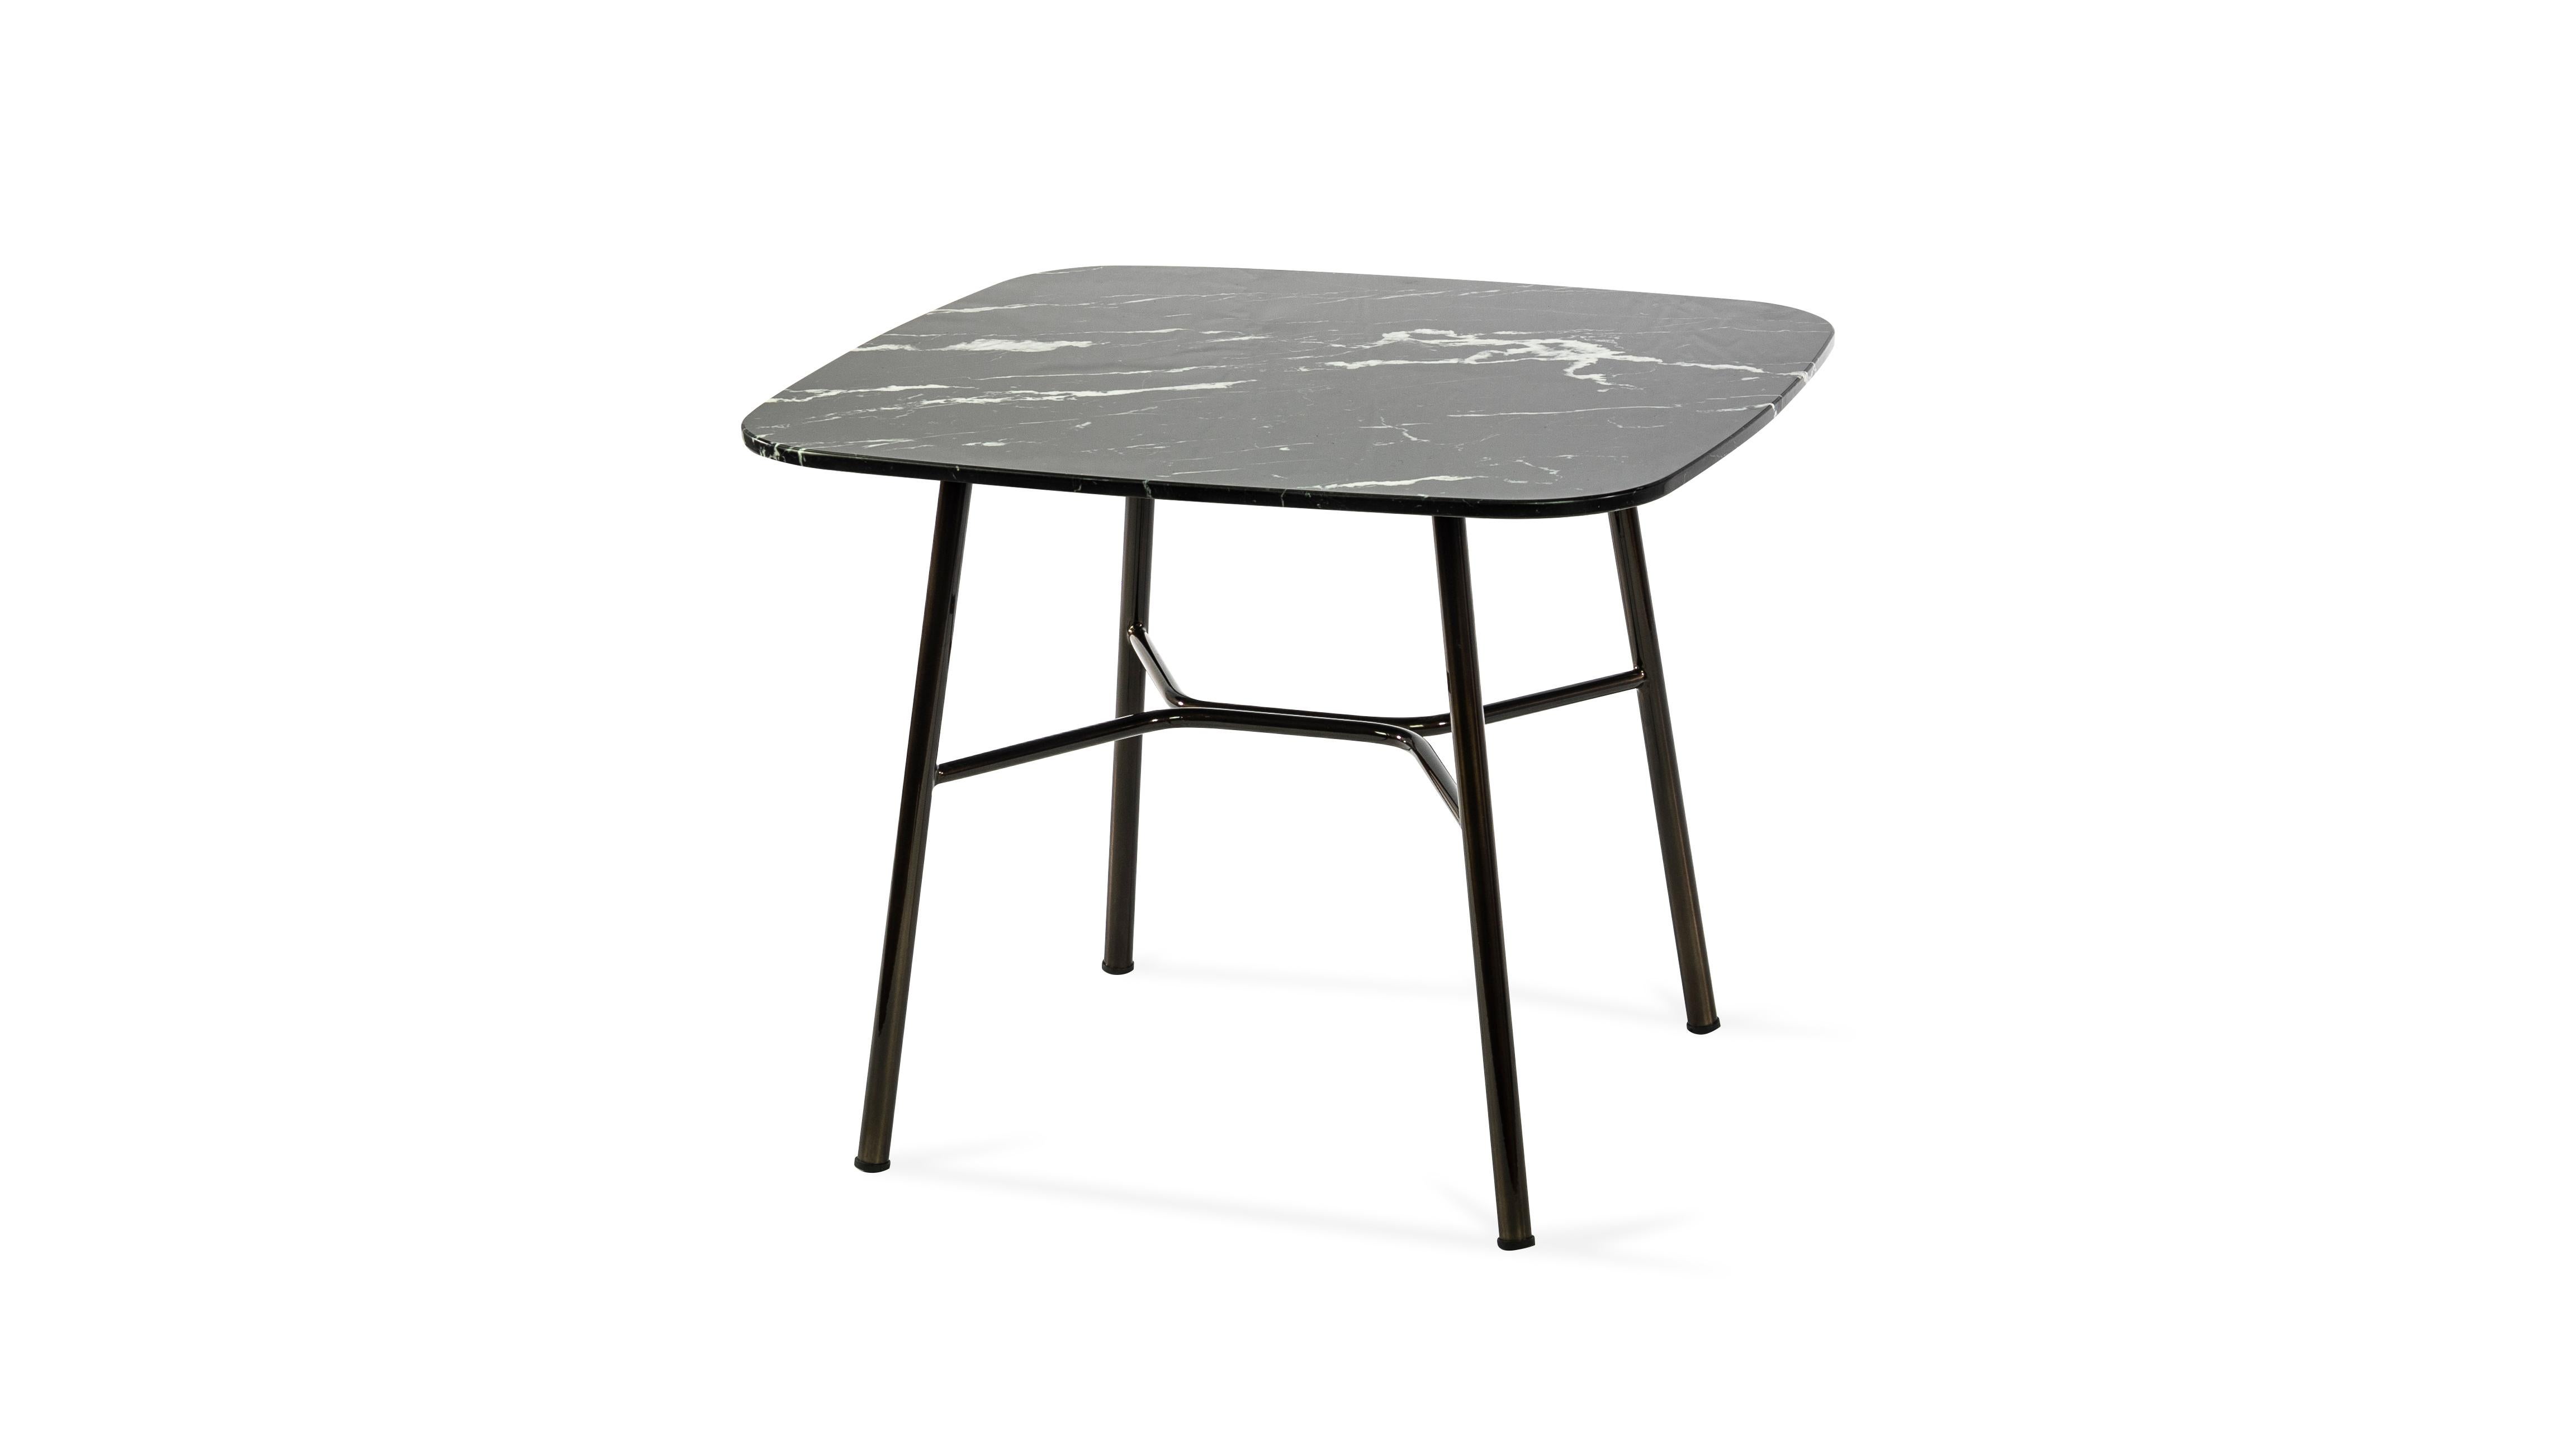 Coffee table, with metal frame, painted in standard or special colors, top available in glass ceramic color black Marquina marble 70 x 70 cm, H 45.
It fits perfectly in a hotel lounge or home environment.